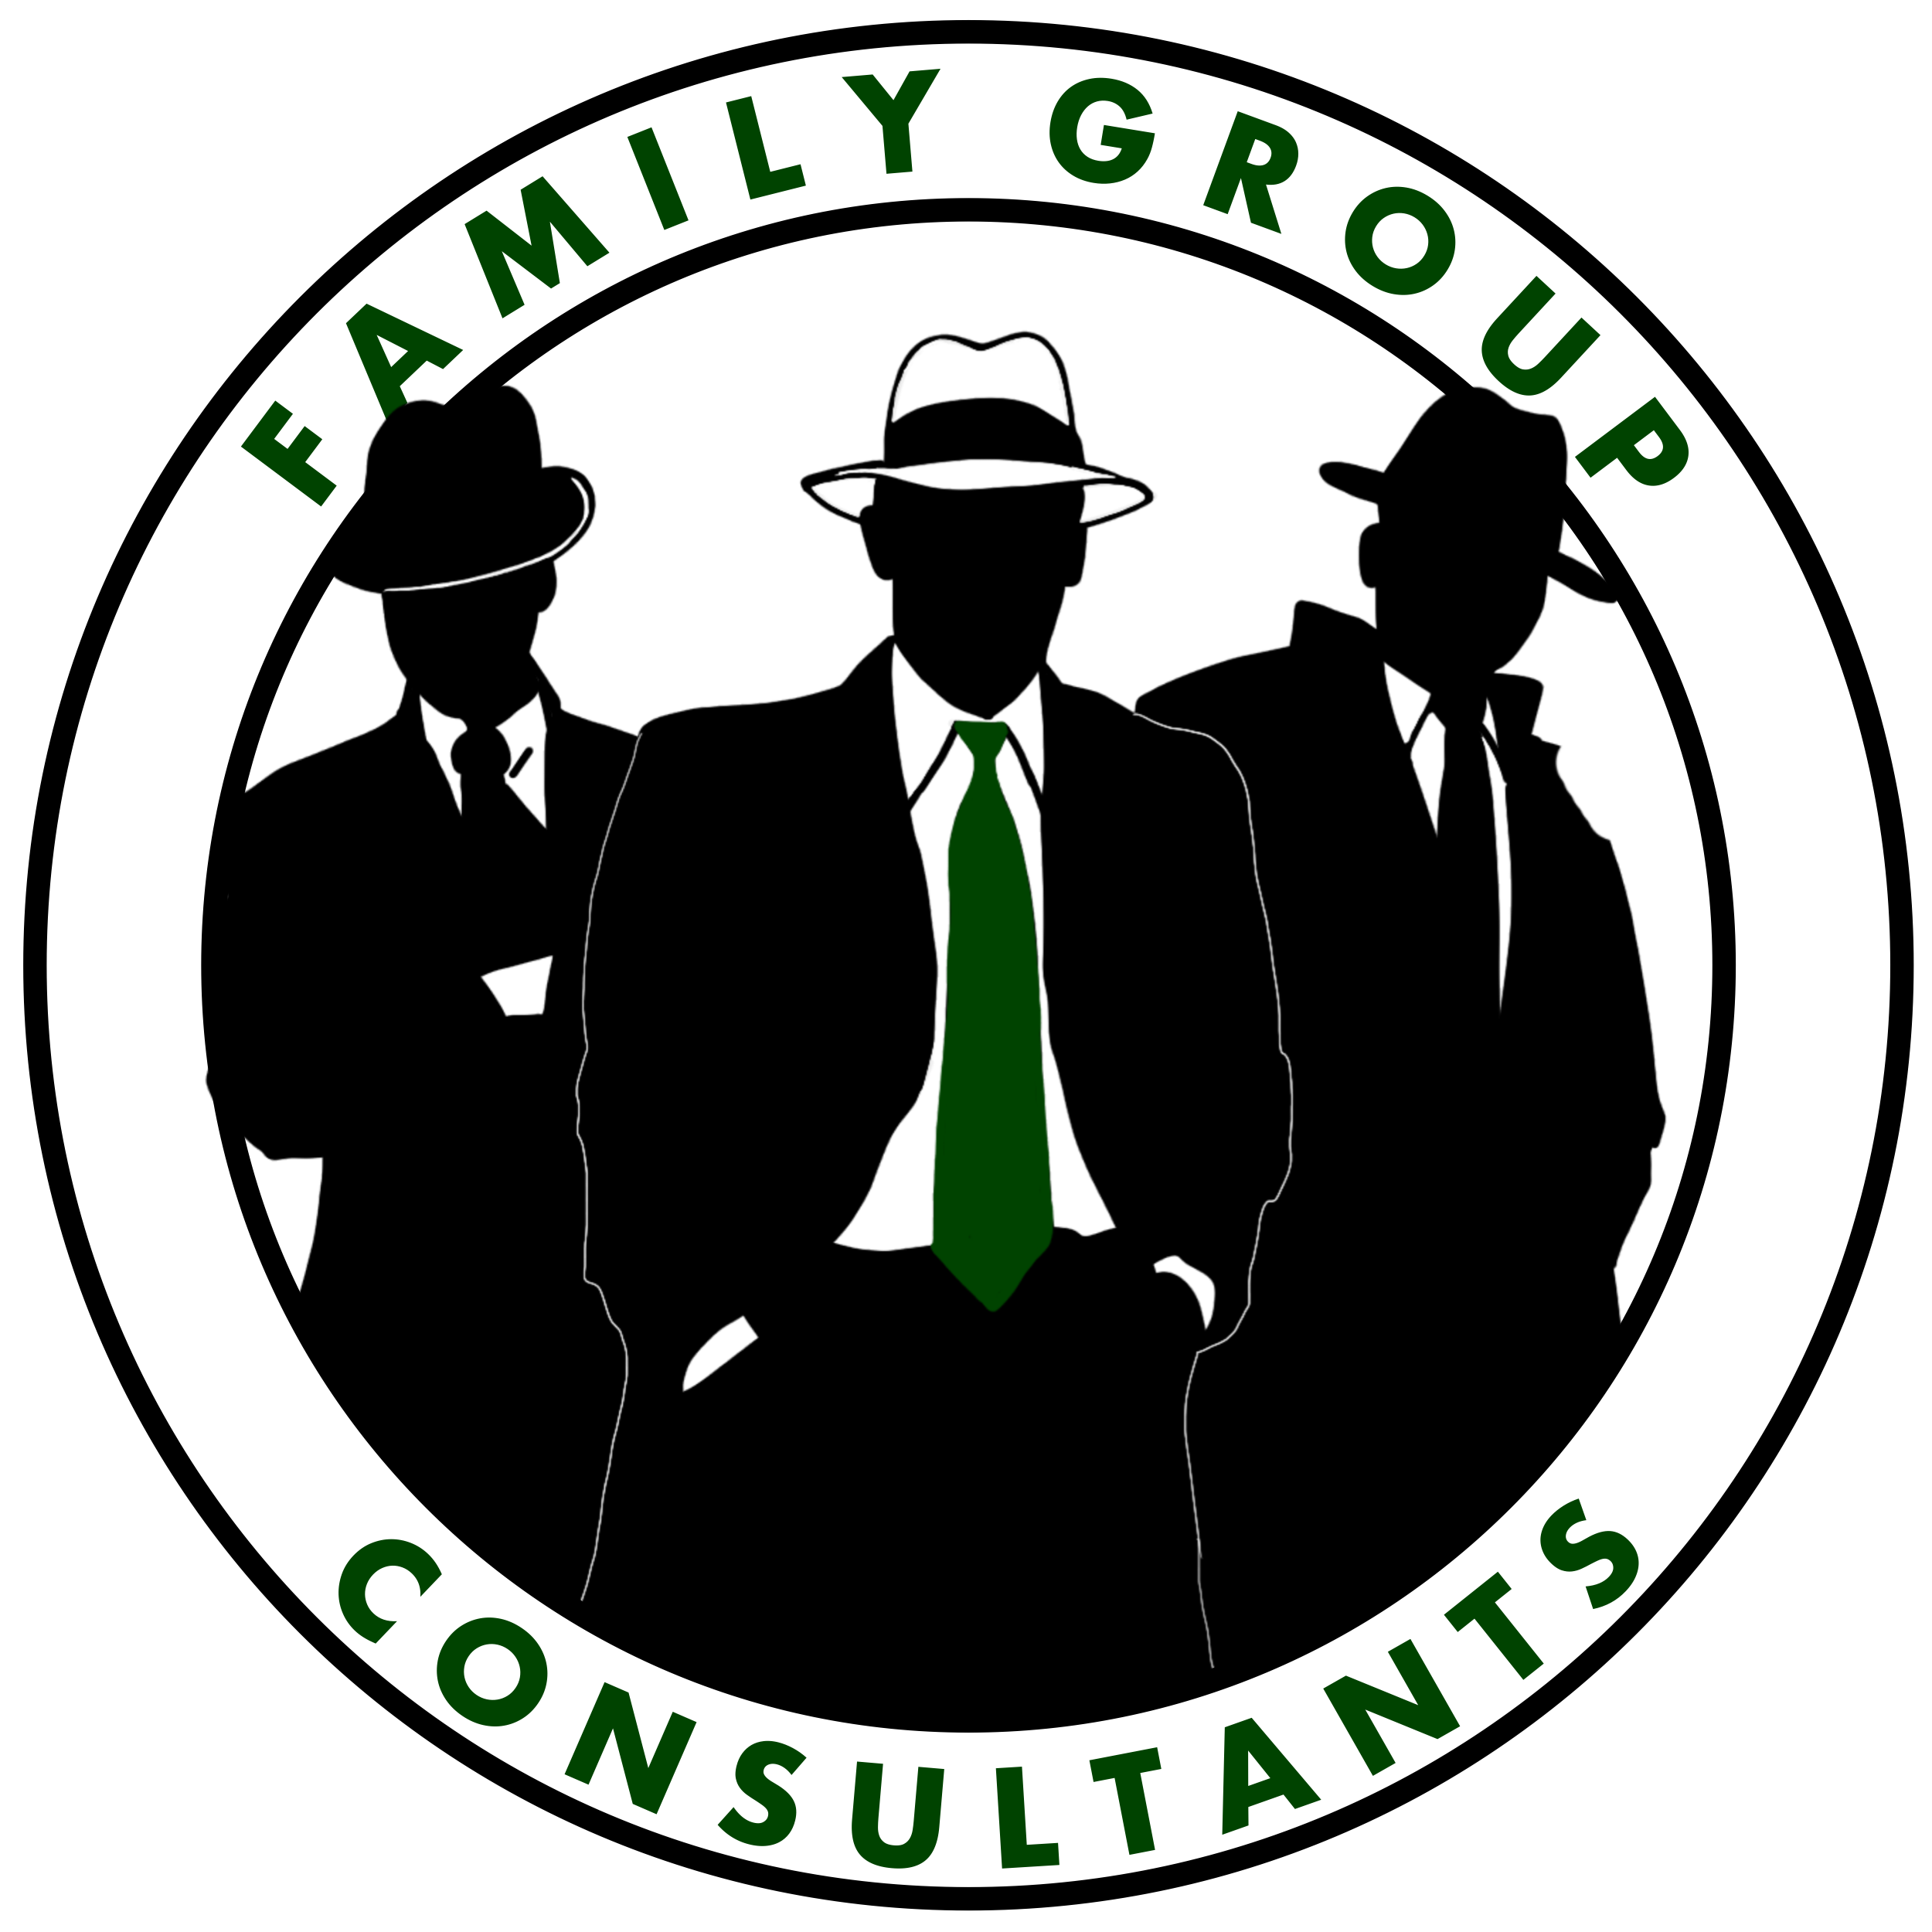 Gopa Consulting Group. Perfect Consulting Group logo.